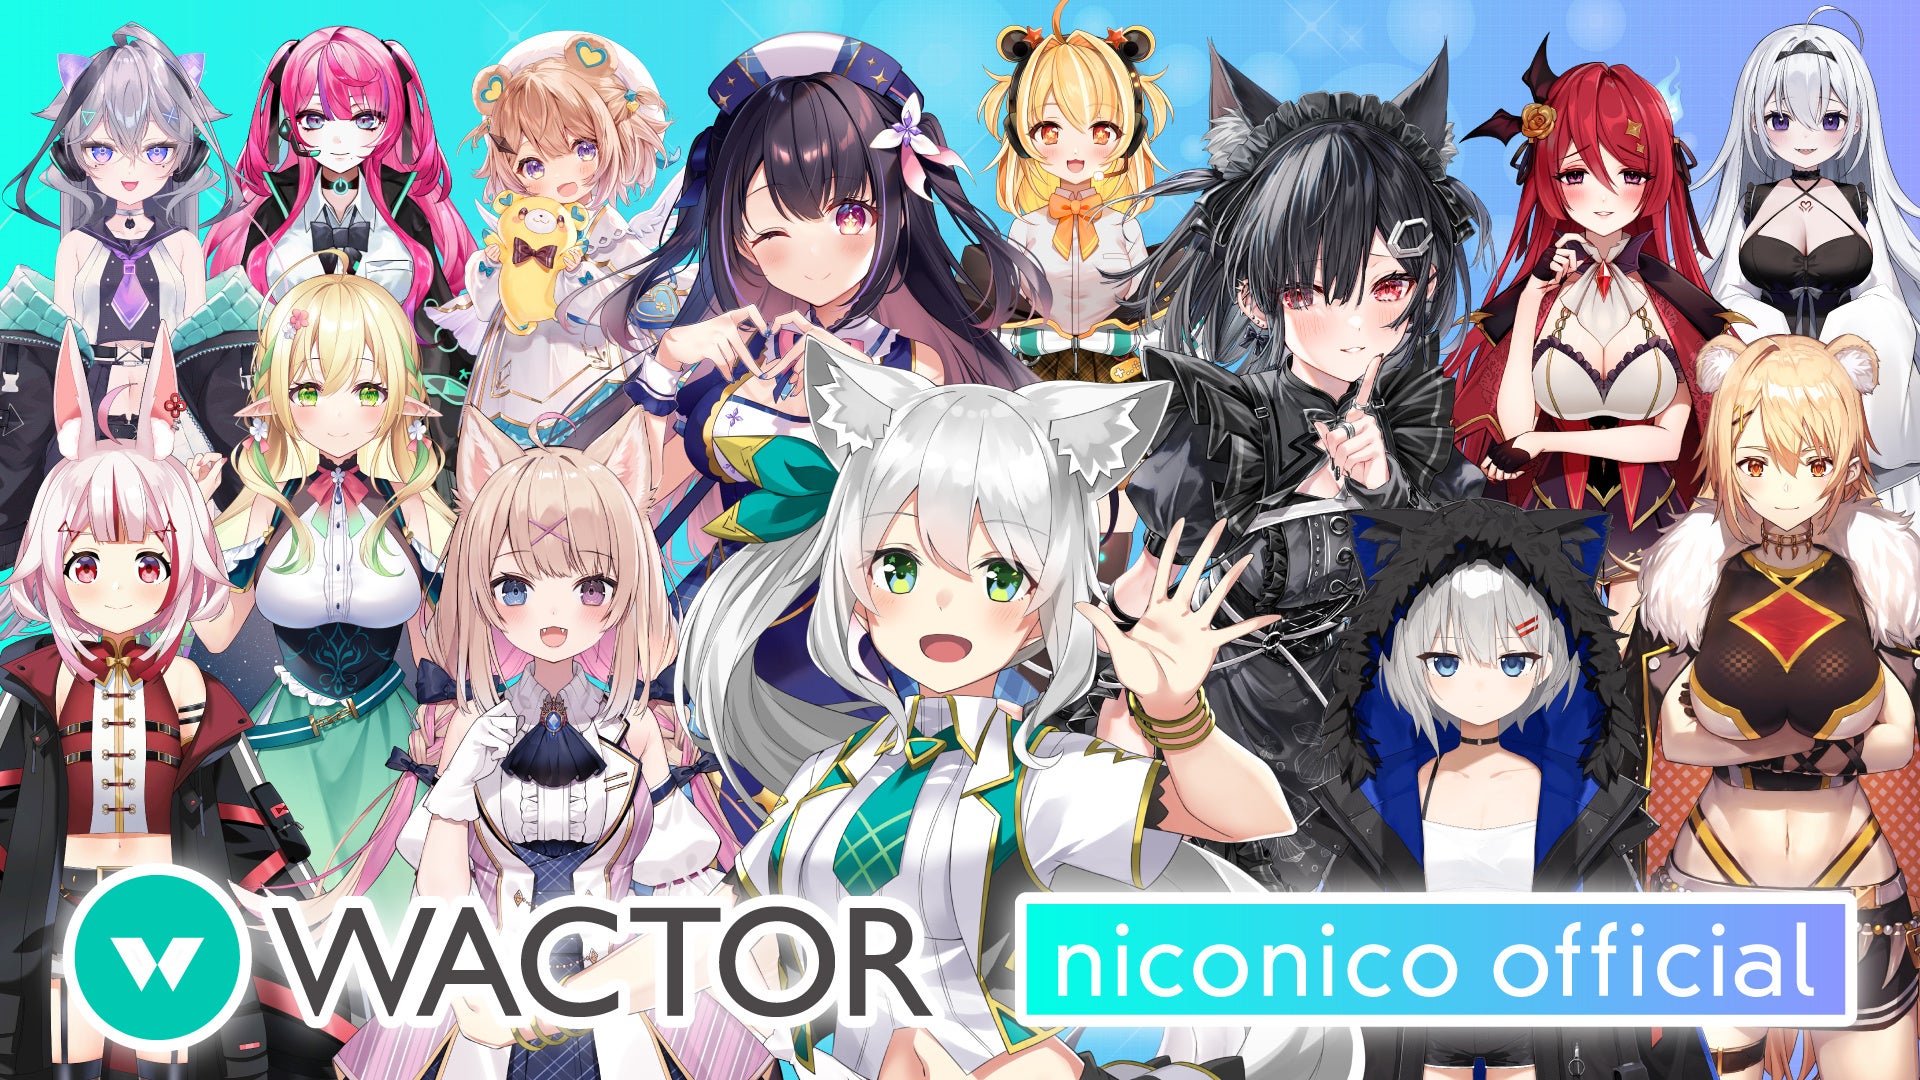 VTuberプロダクション「WACTOR」のニコニコチャンネルプラス「WACTOR niconico official」が開設！2022年8月28日（日）昼12時より初回生放送が決定！